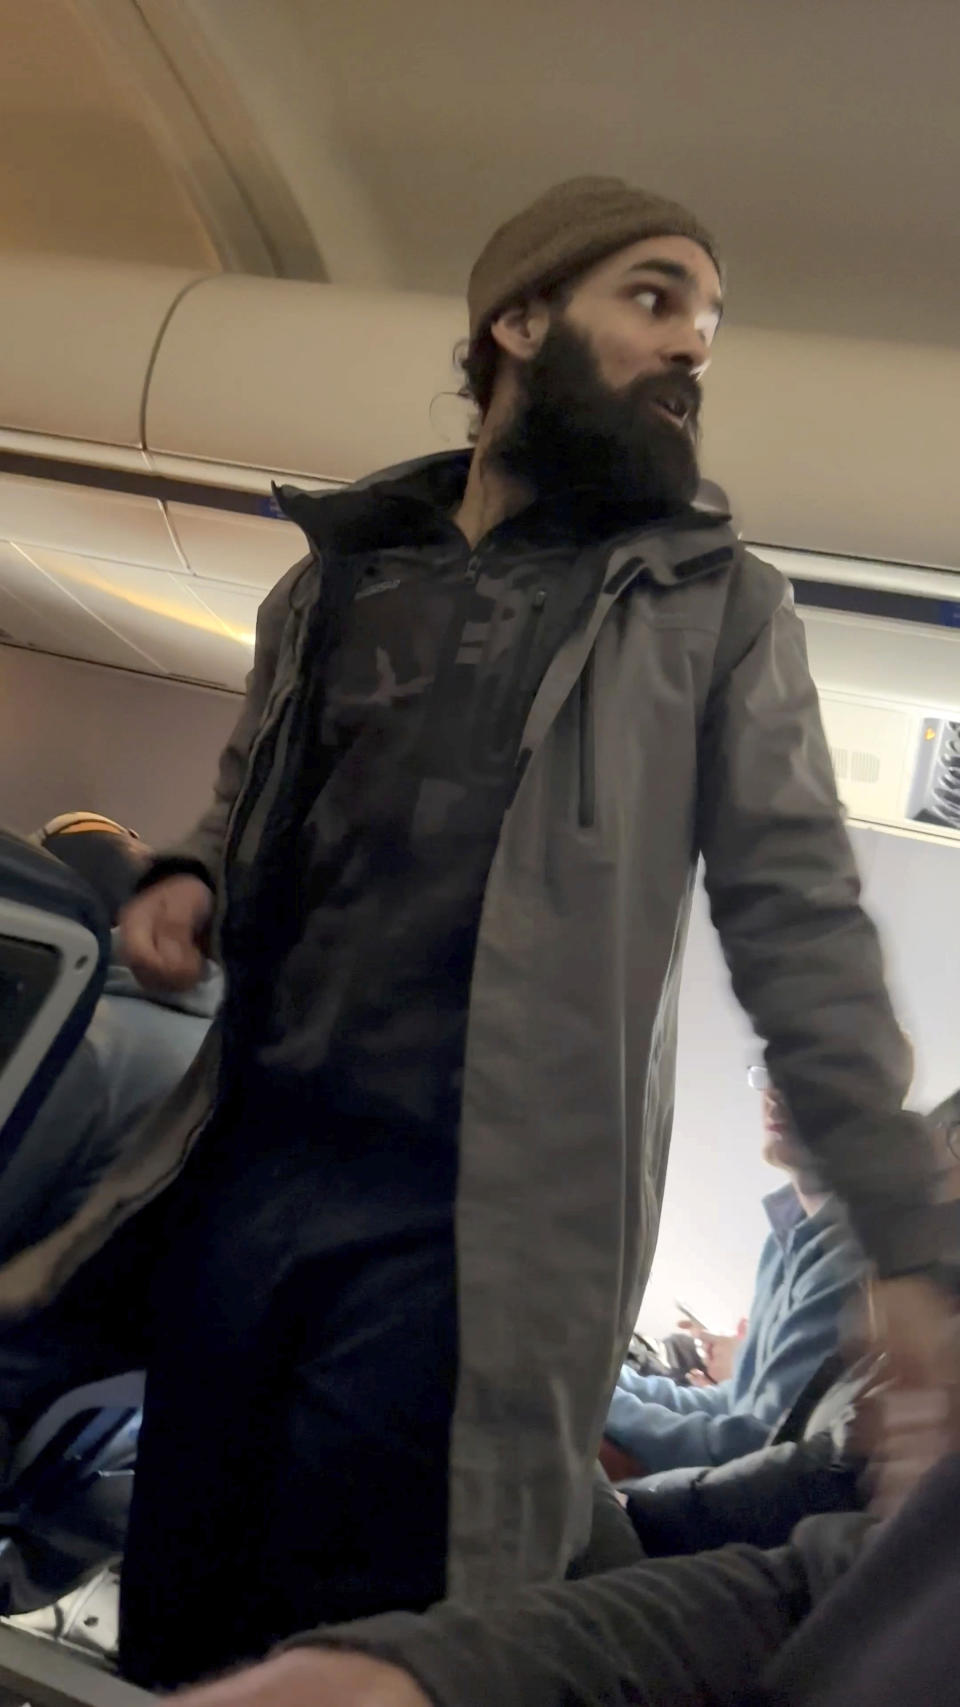 FILE - This still image from video provided by Lisa Olsen shows a man who federal authorities have identified as Francisco Severo Torres as he moves through the cabin on a weekend flight from Los Angeles to Boston, March 5, 2023. The Massachusetts man accused of attacking a flight attendant and attempting to open the plane's emergency door on a cross-country flight has directed attention to passengers with mental health challenges. (Lisa Olsen via AP, File)